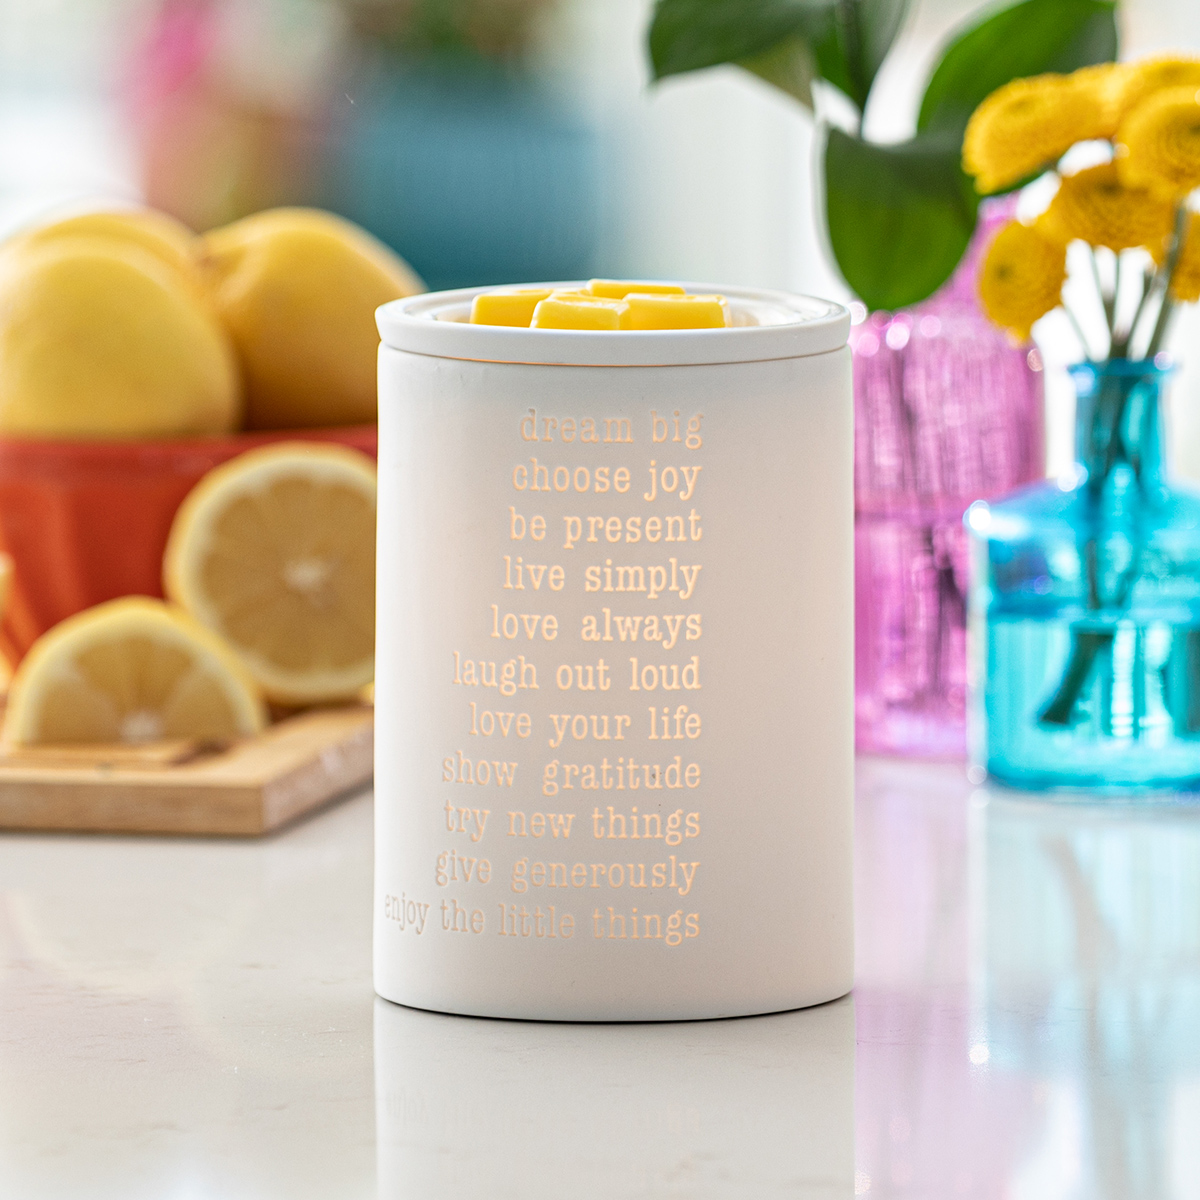 Coming March 1st! 
Simple Reminders Warmer
#scentsy #scentsywarmer #simplereminders #inspirationalquotes #inspiration #dreambig #choosejoy #bepresent #livesimply #lovealways #laughoutloud #loveyourlife #showgratitude #trynewthings #givegenerously #enjoythelittlethings